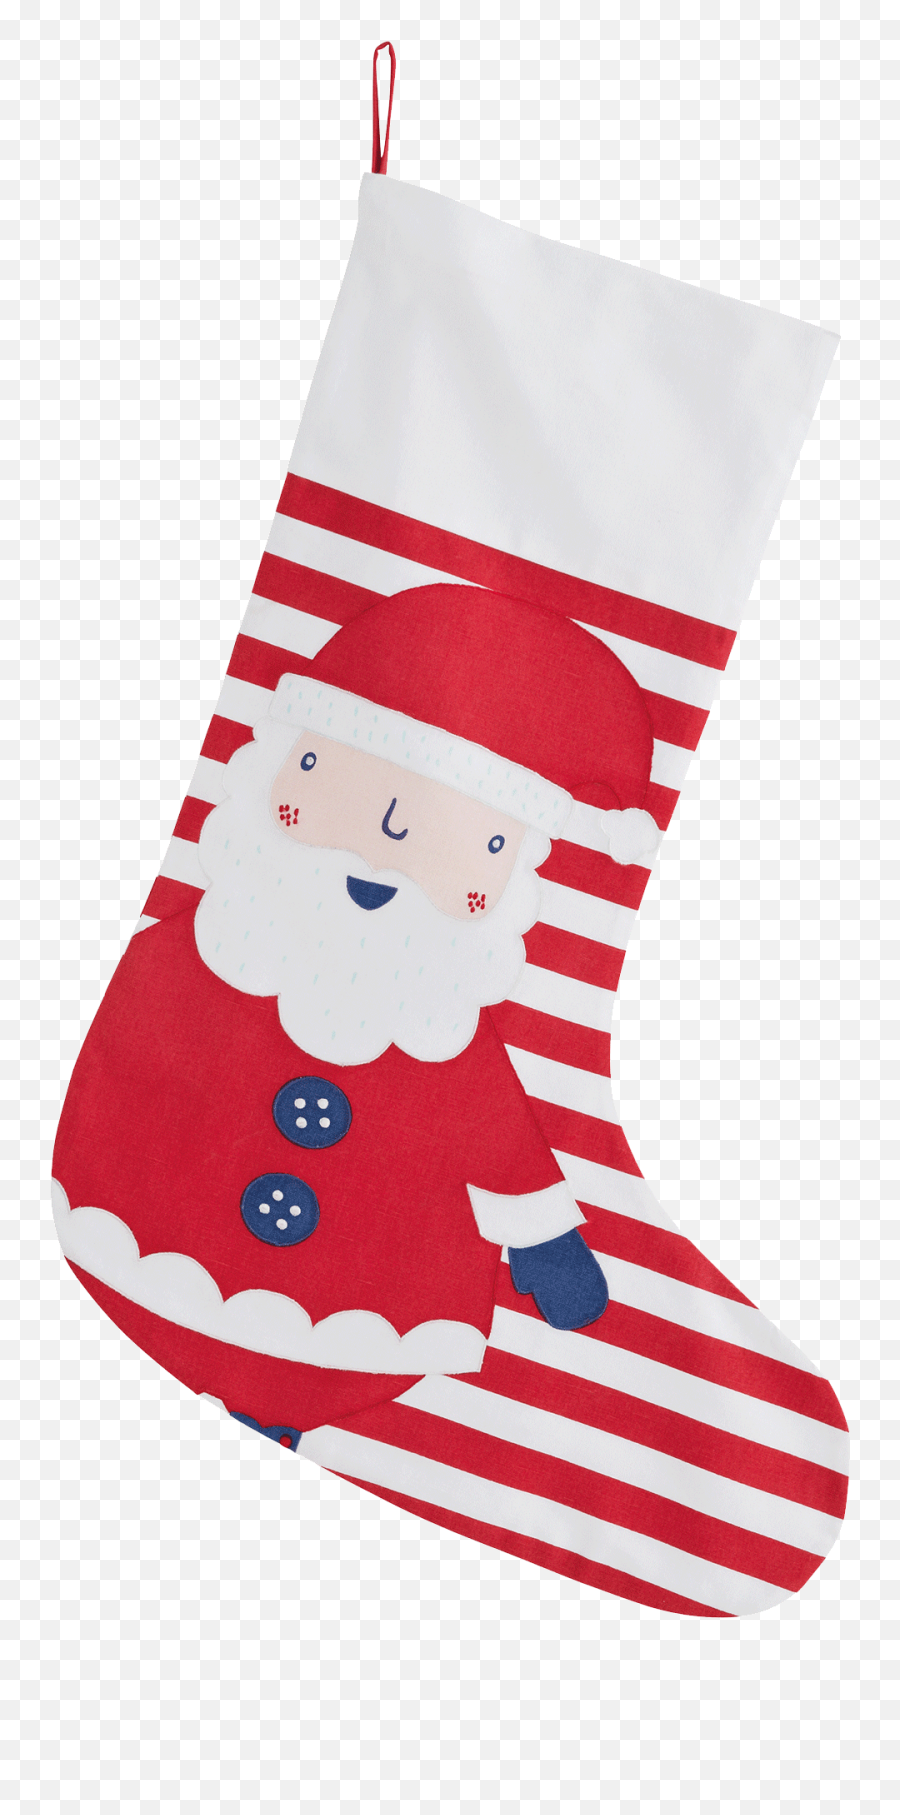 Unpersonalised Christmas Stocking - Christmas Stocking Png,Stocking Png